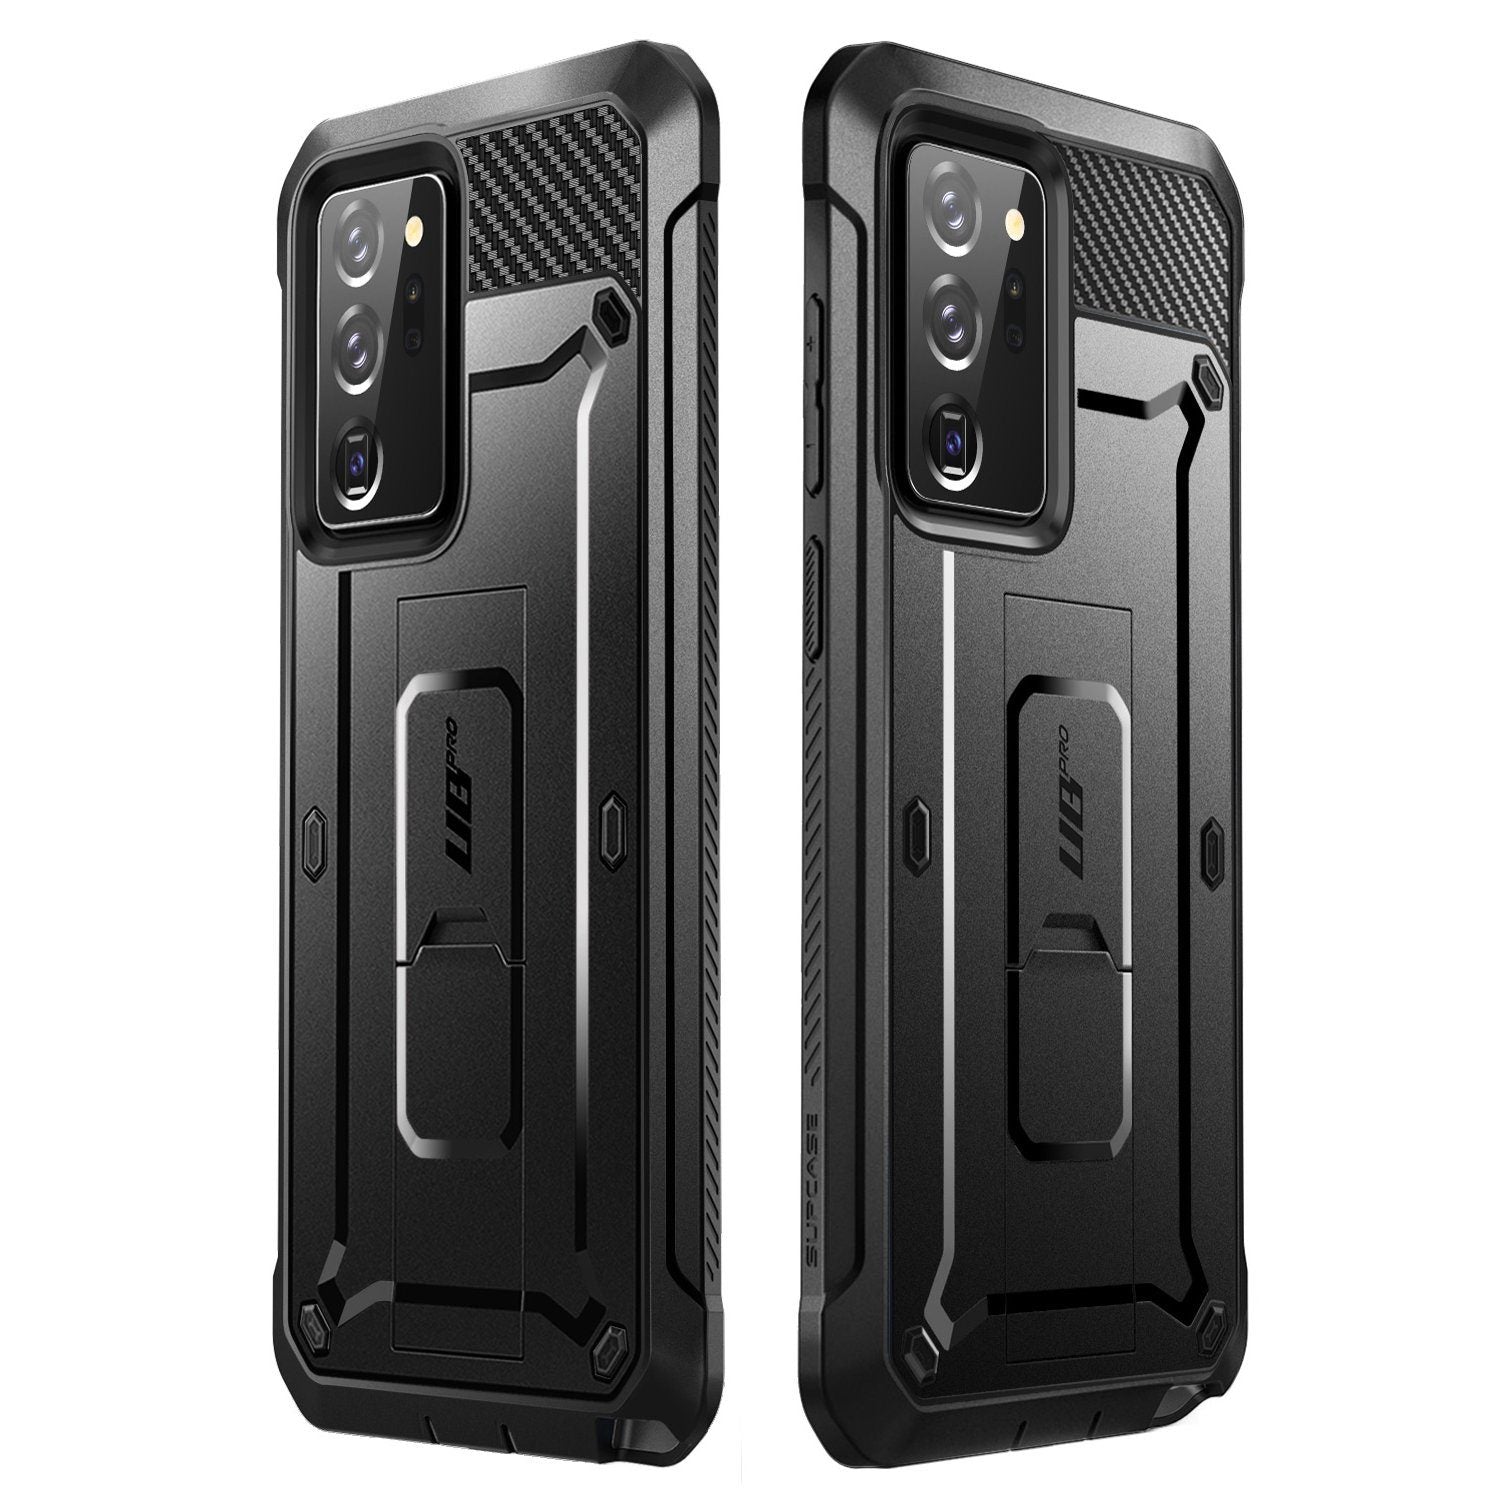 Supcase UB Pro Series Full-Body Rugged Holster Case for Samsung Galaxy Note 20 Ultra(Without Screen Protector), Black Default supcase 